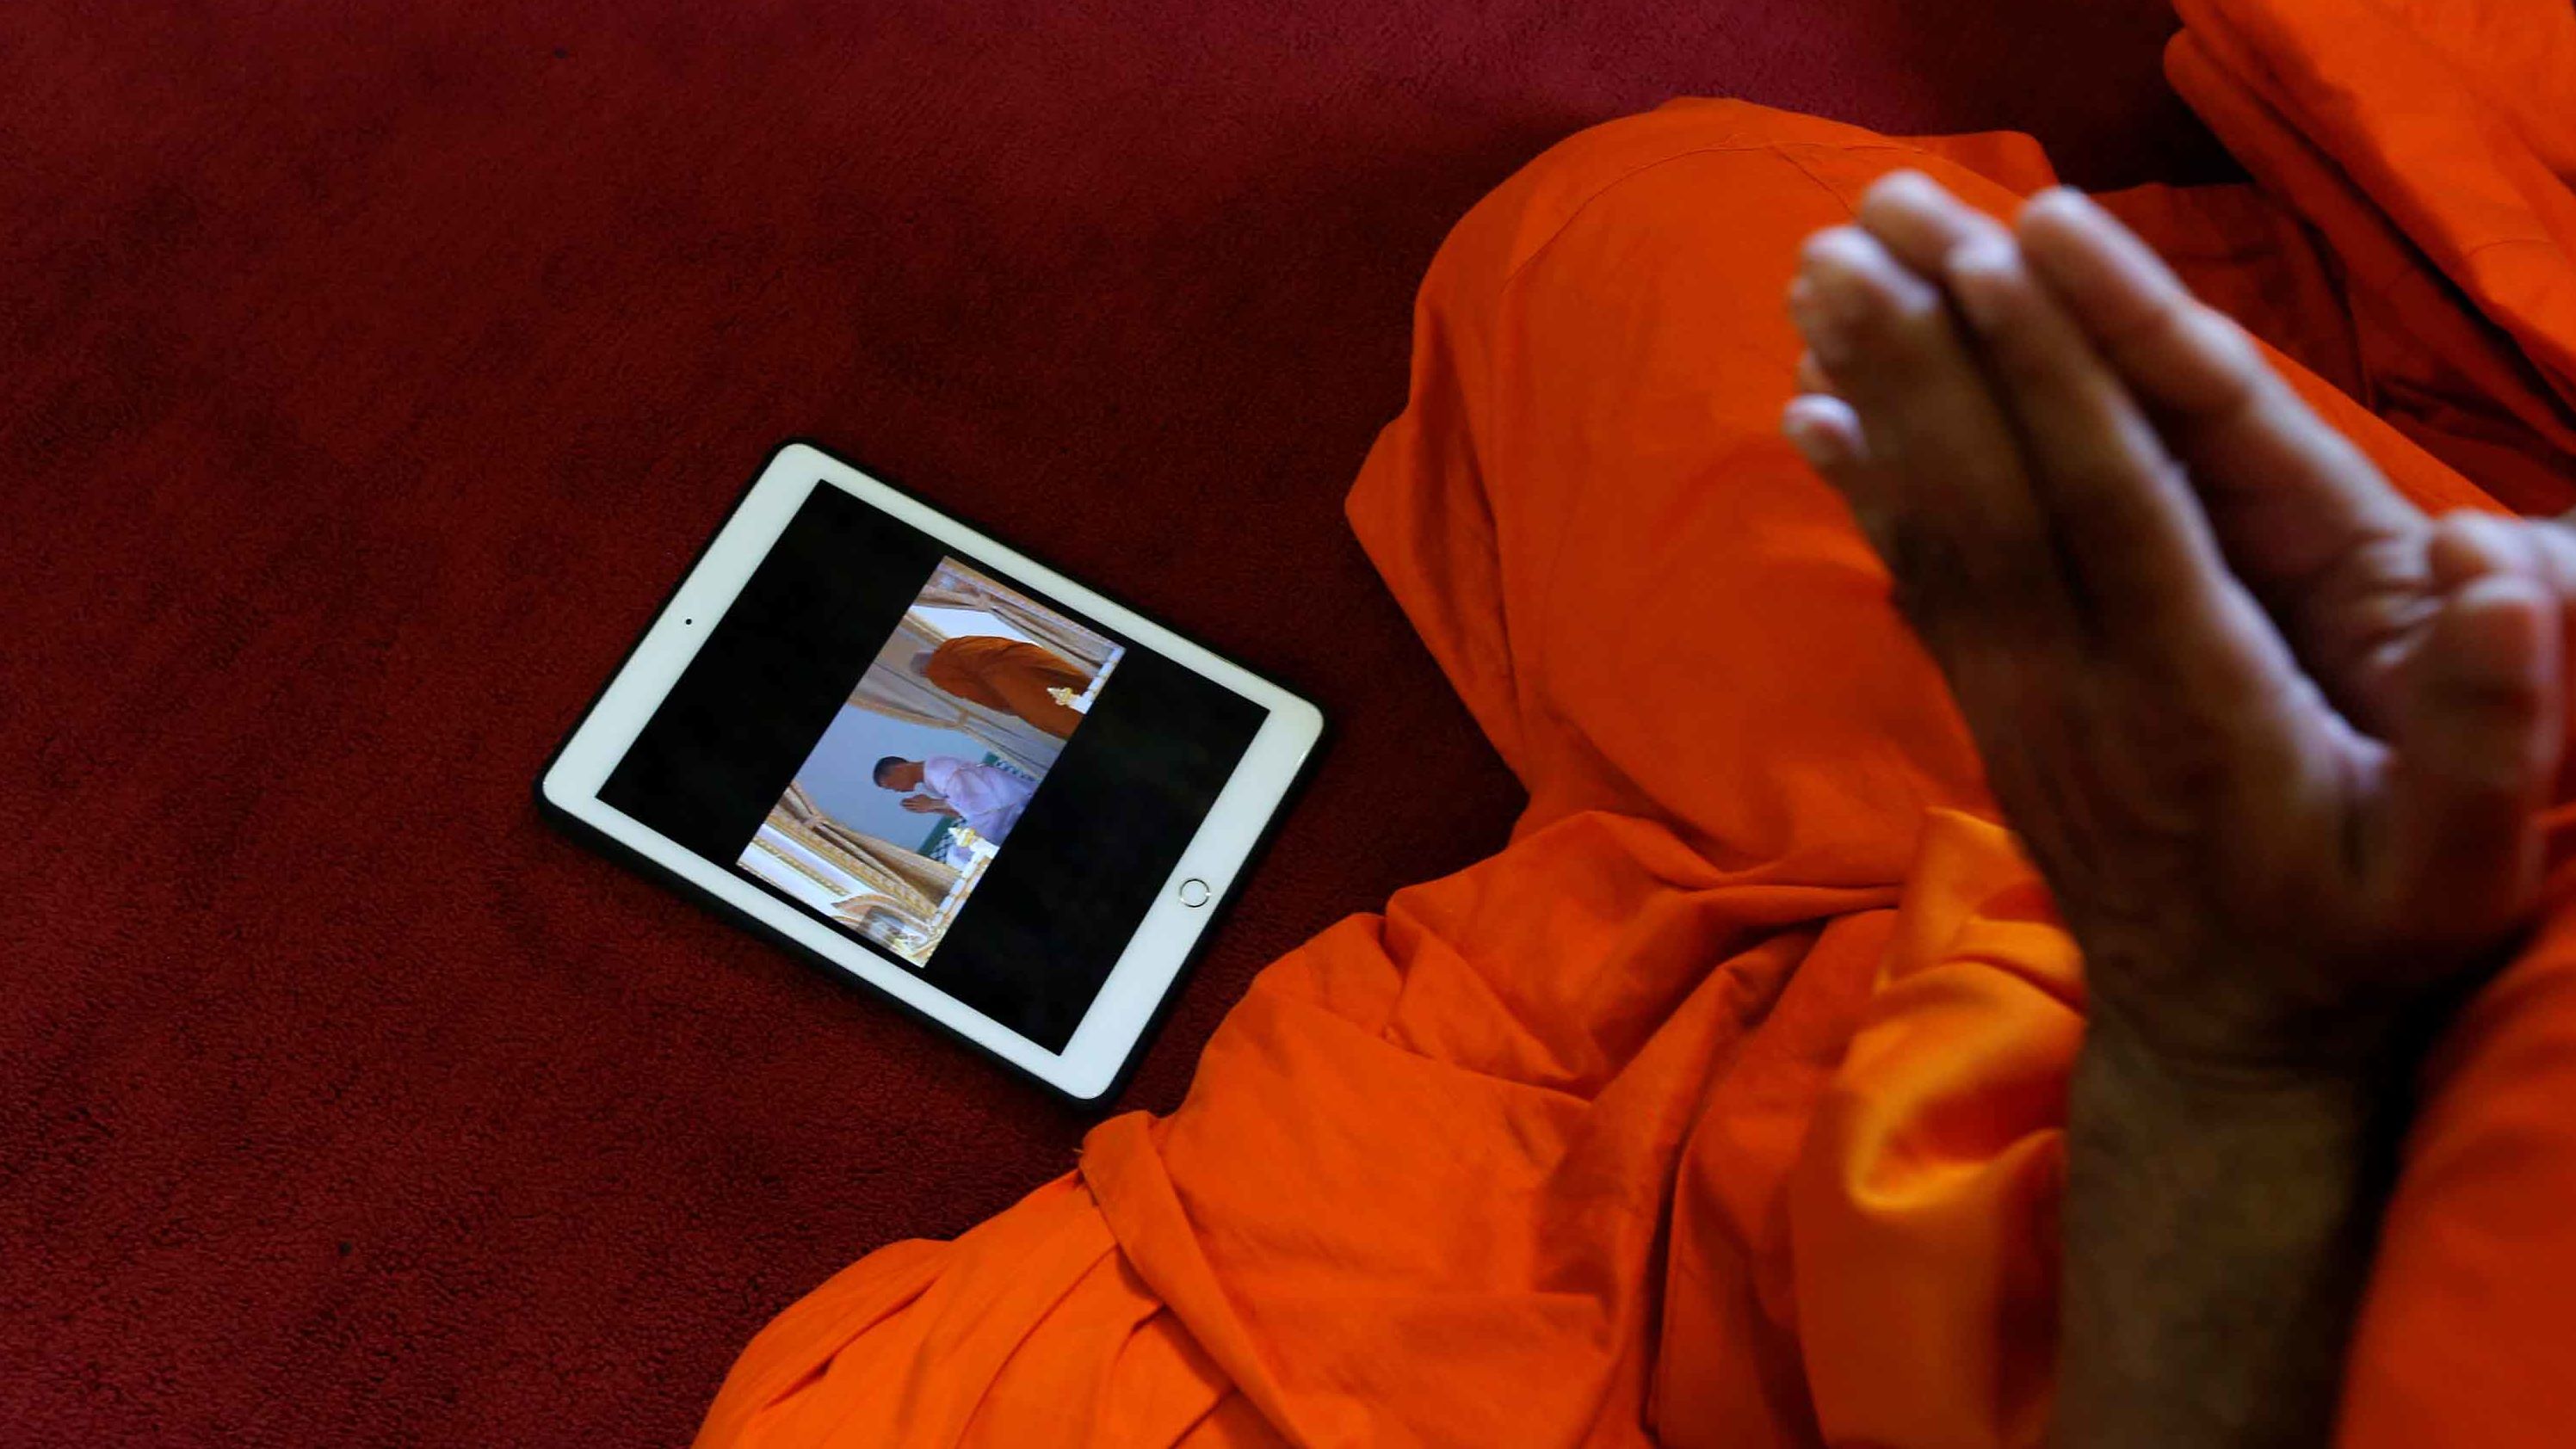 A tablet displaying King Maha Vajiralongkorn undergoing a royal purification ritual is seen as a Buddhist monk prays during the King's coronation on Saturday.